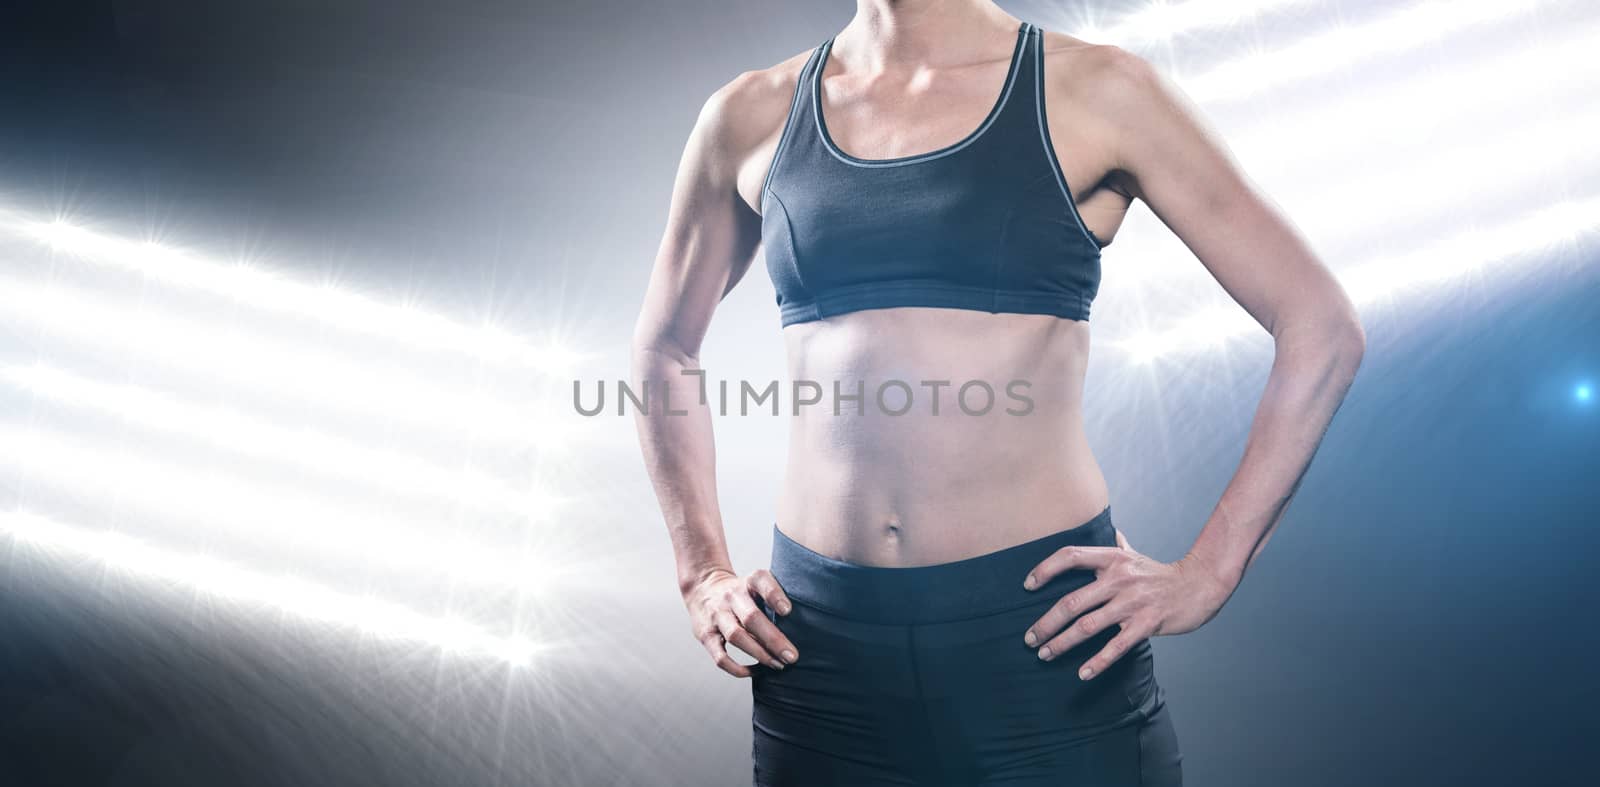 Female athlete standing with hand on hip against spotlights